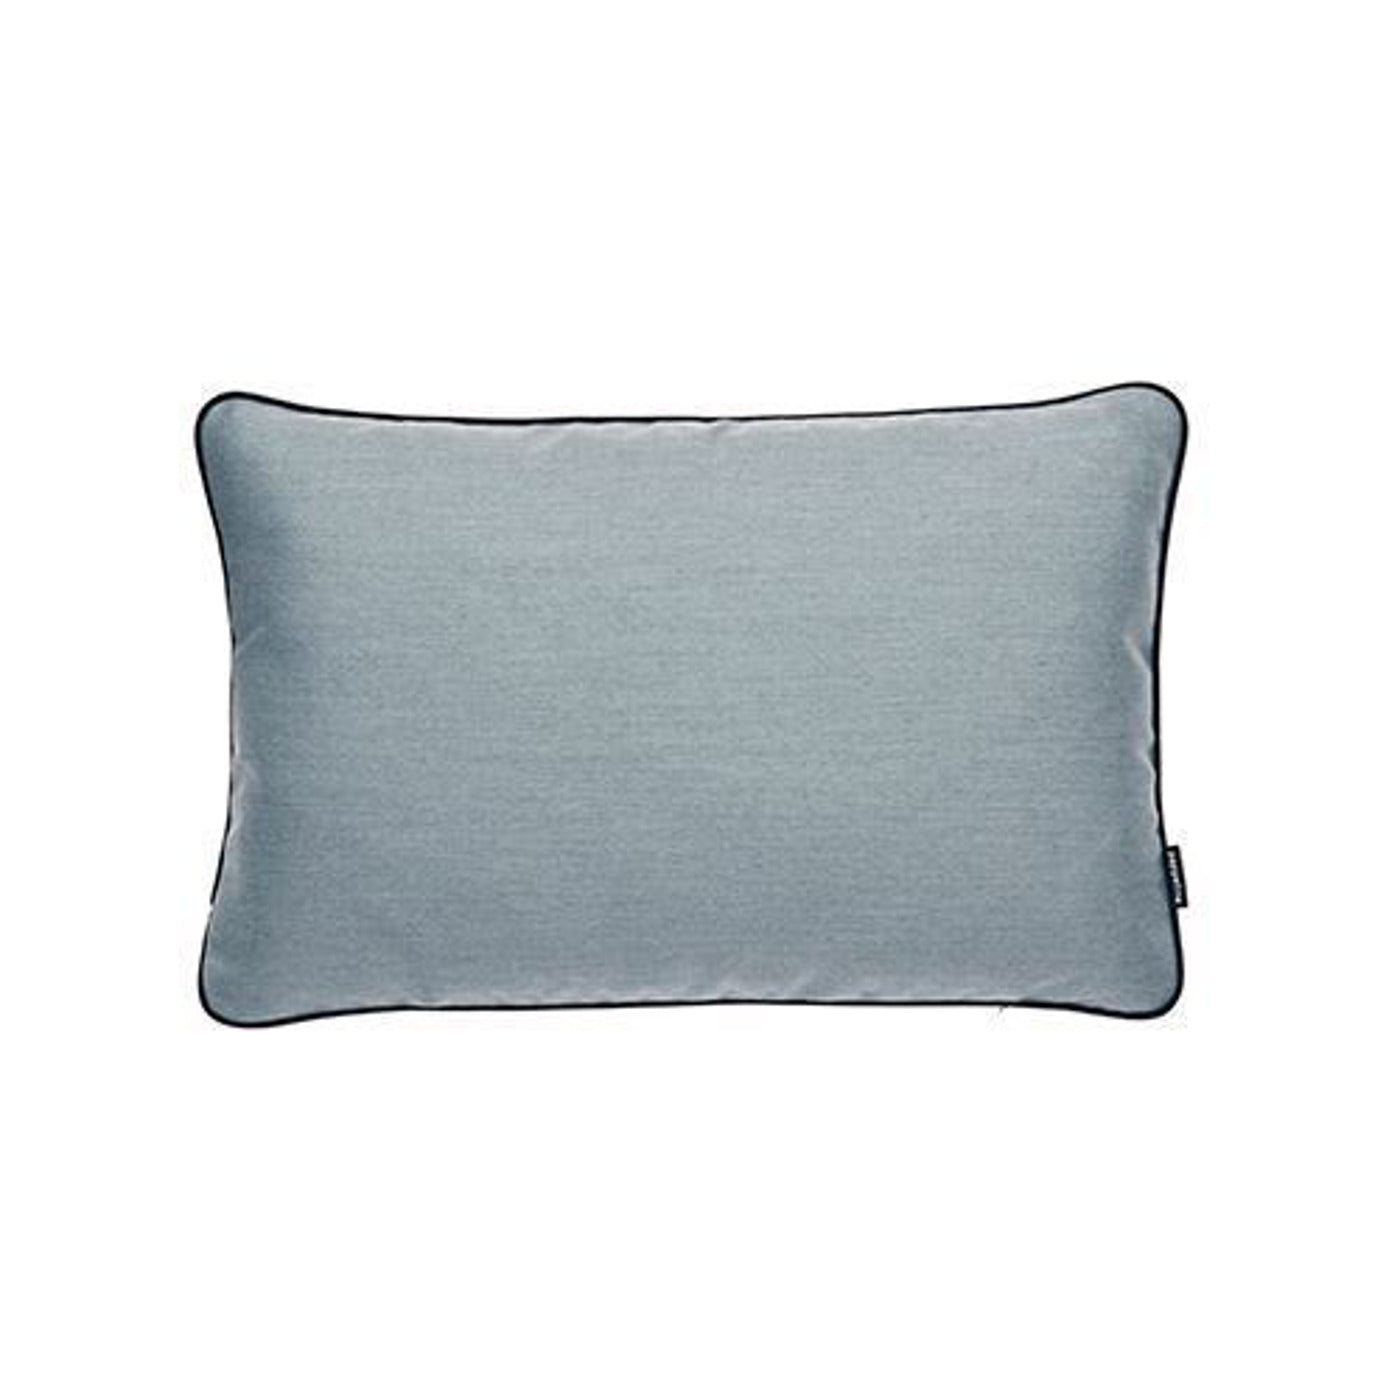 Pappelina Cushion / pillow for indoor and outdoor use RAY Storm